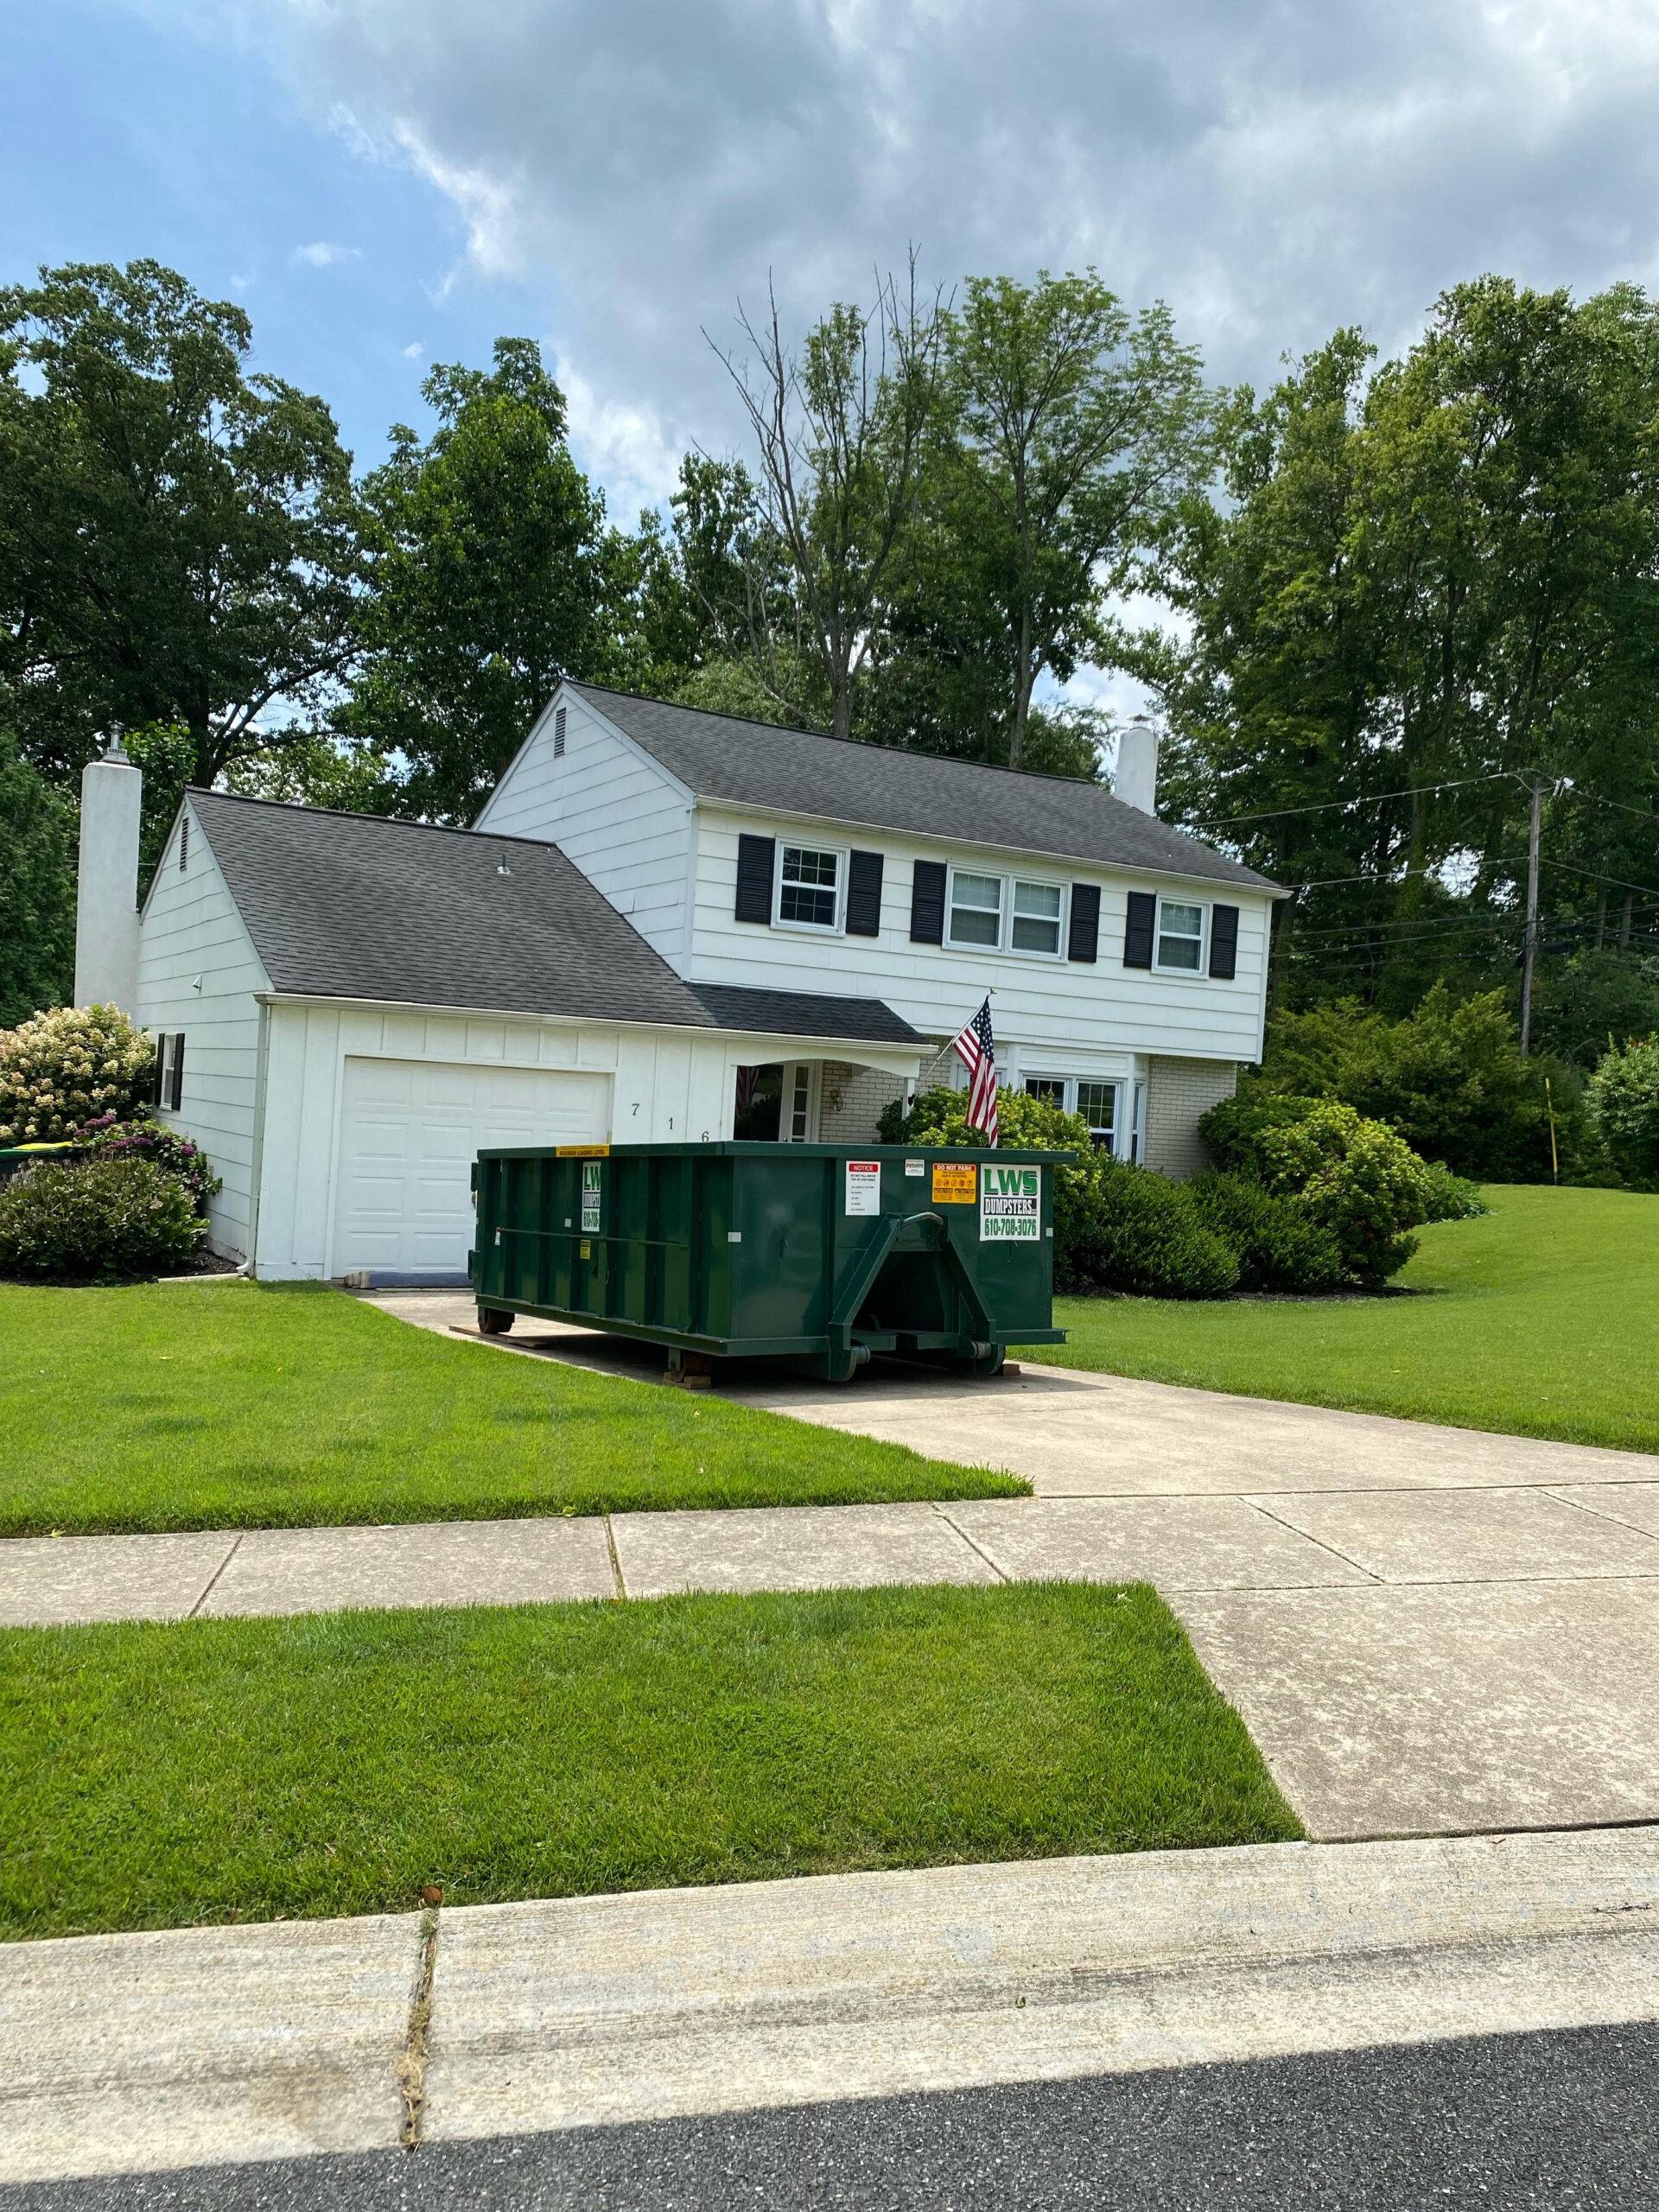 Upgrade Your Project with a Dumpster Rental in Paoli, PA